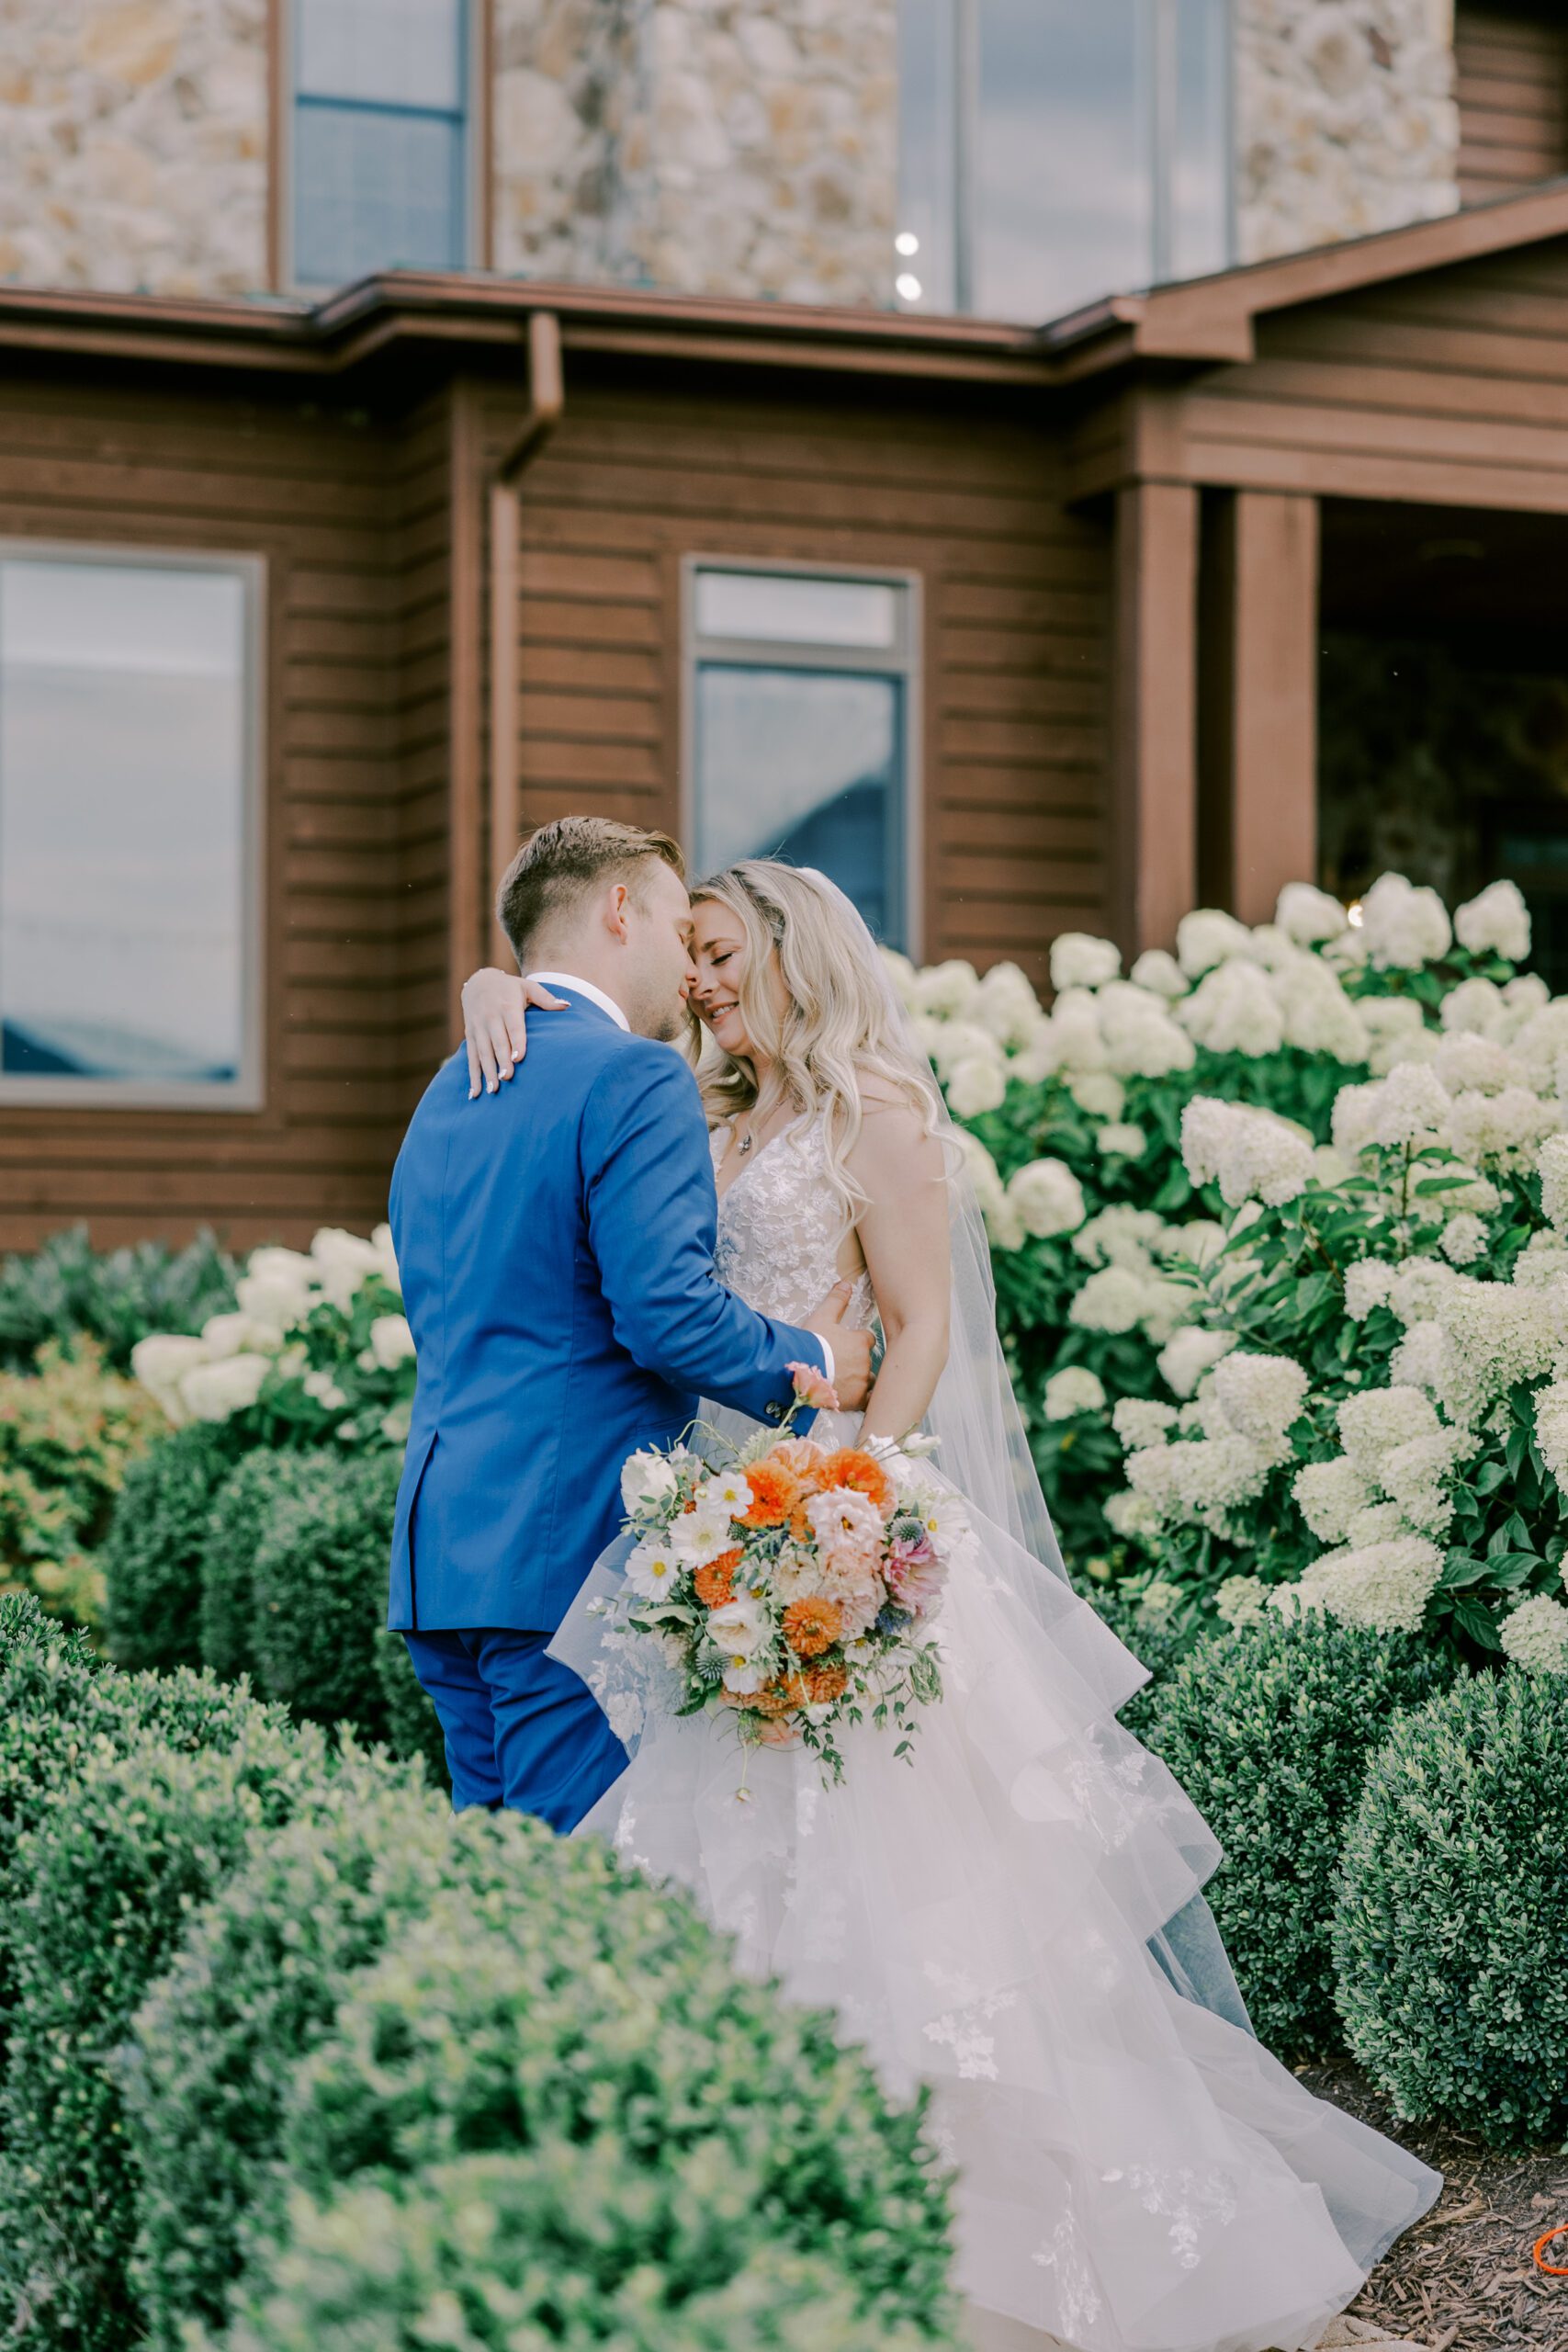 Bride and groom standing close with their noses touching, bride holding bouquet of orange, white, and pink flowers